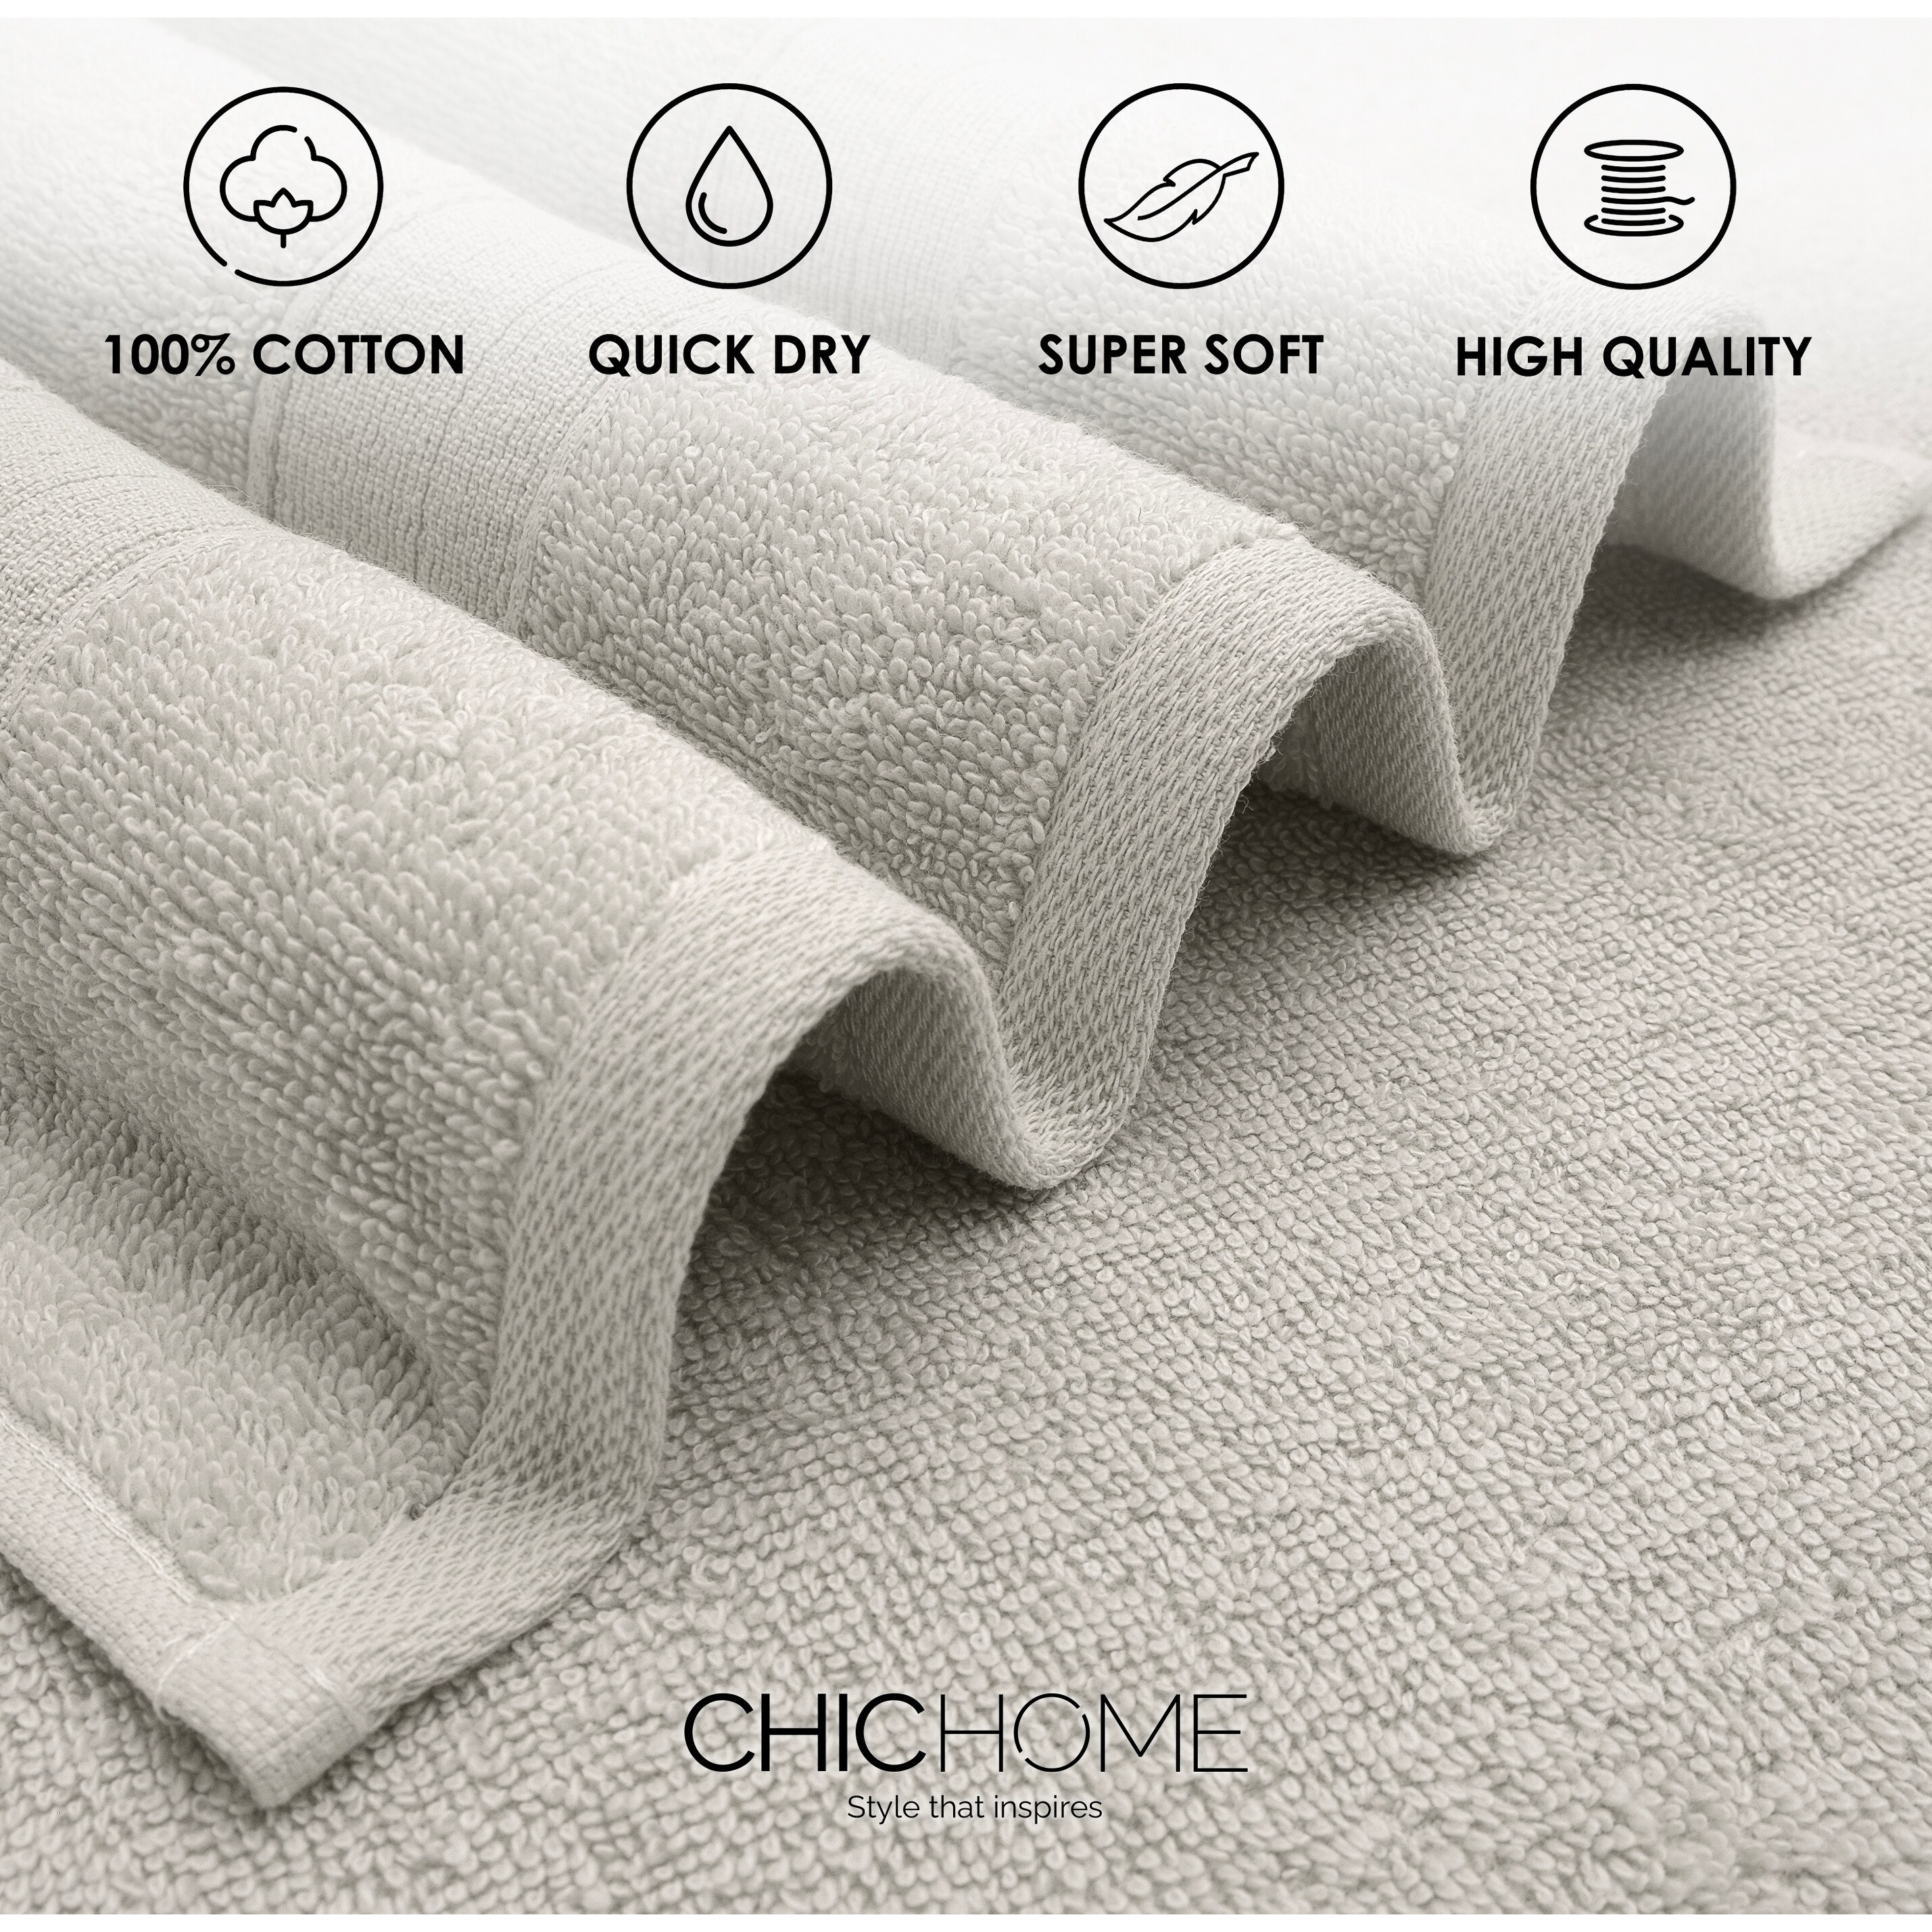 https://ak1.ostkcdn.com/images/products/is/images/direct/0af7c2c322211eee88b79b0391ed397e6eb87575/Chic-Home-8-Piece-Standard-100-Oeko-Tex-Certified-Towel-Set.jpg